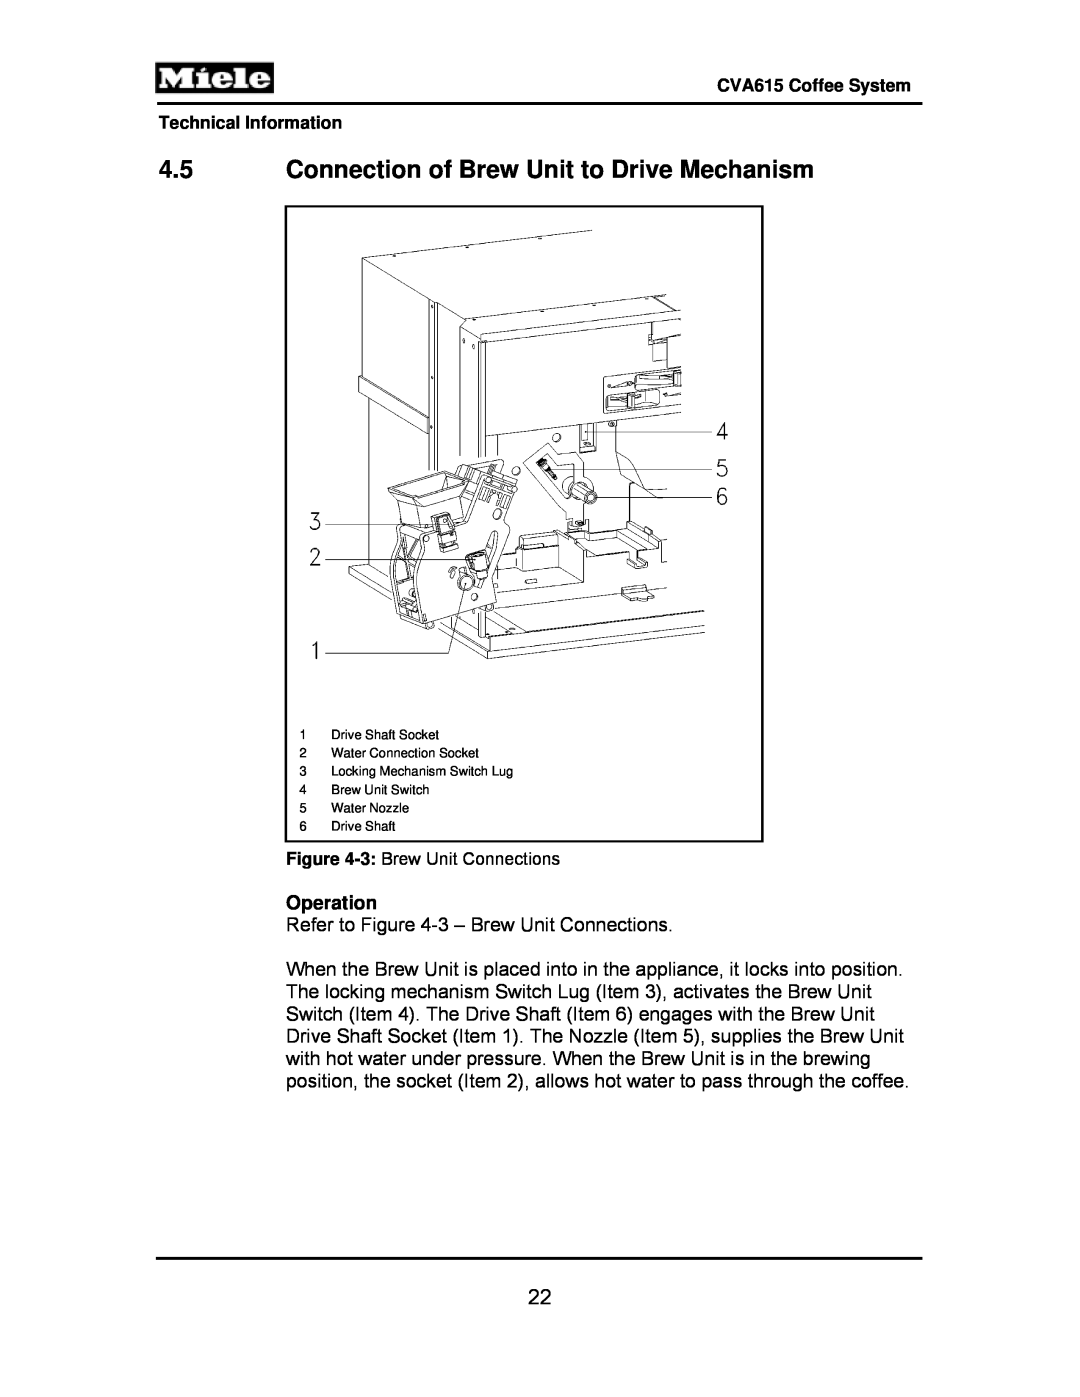 Miele CVA615 manual 4.5Connection of Brew Unit to Drive Mechanism, Operation 